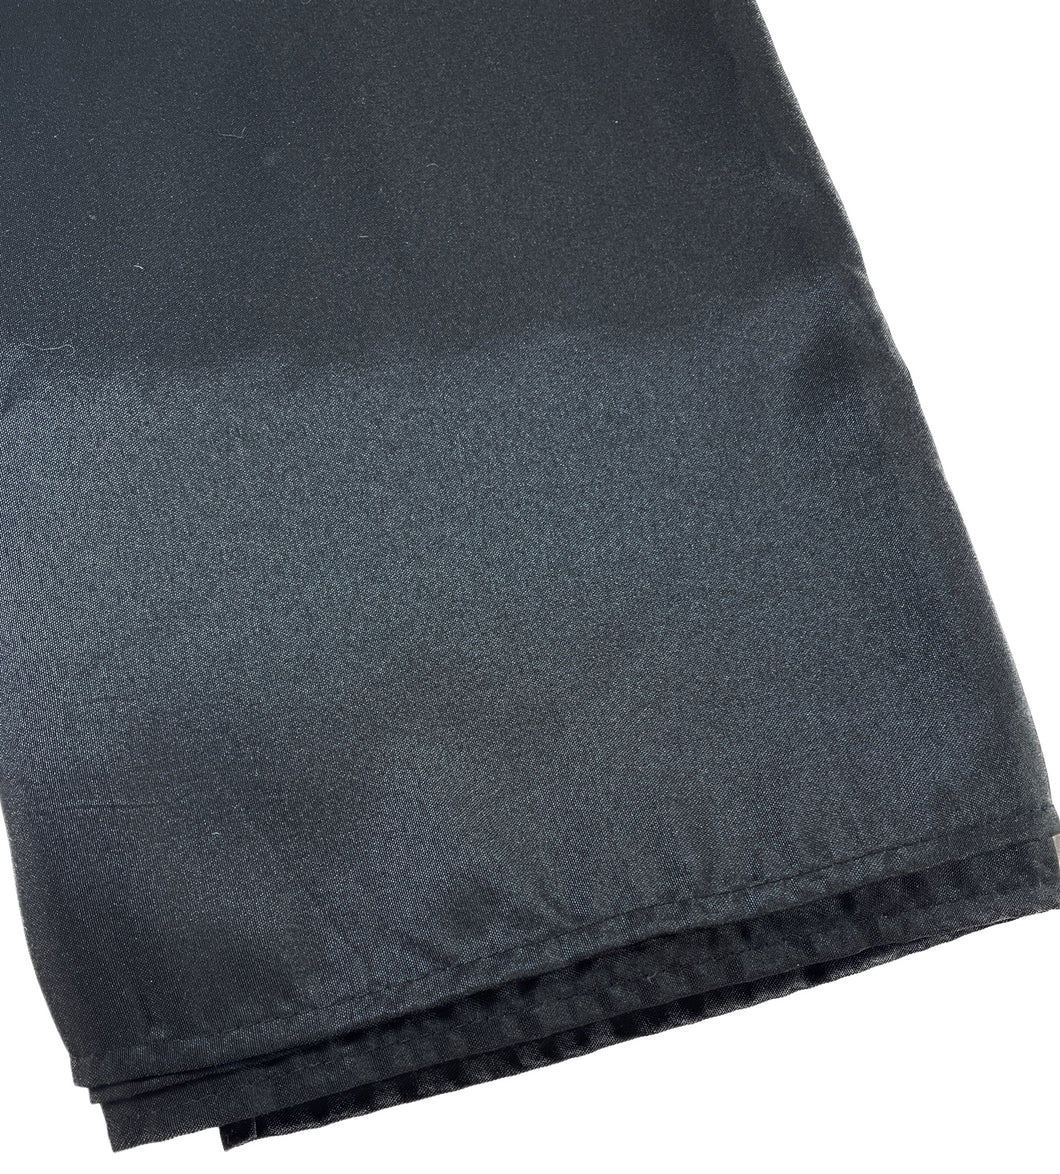 Black Polyester Tablecloth (84